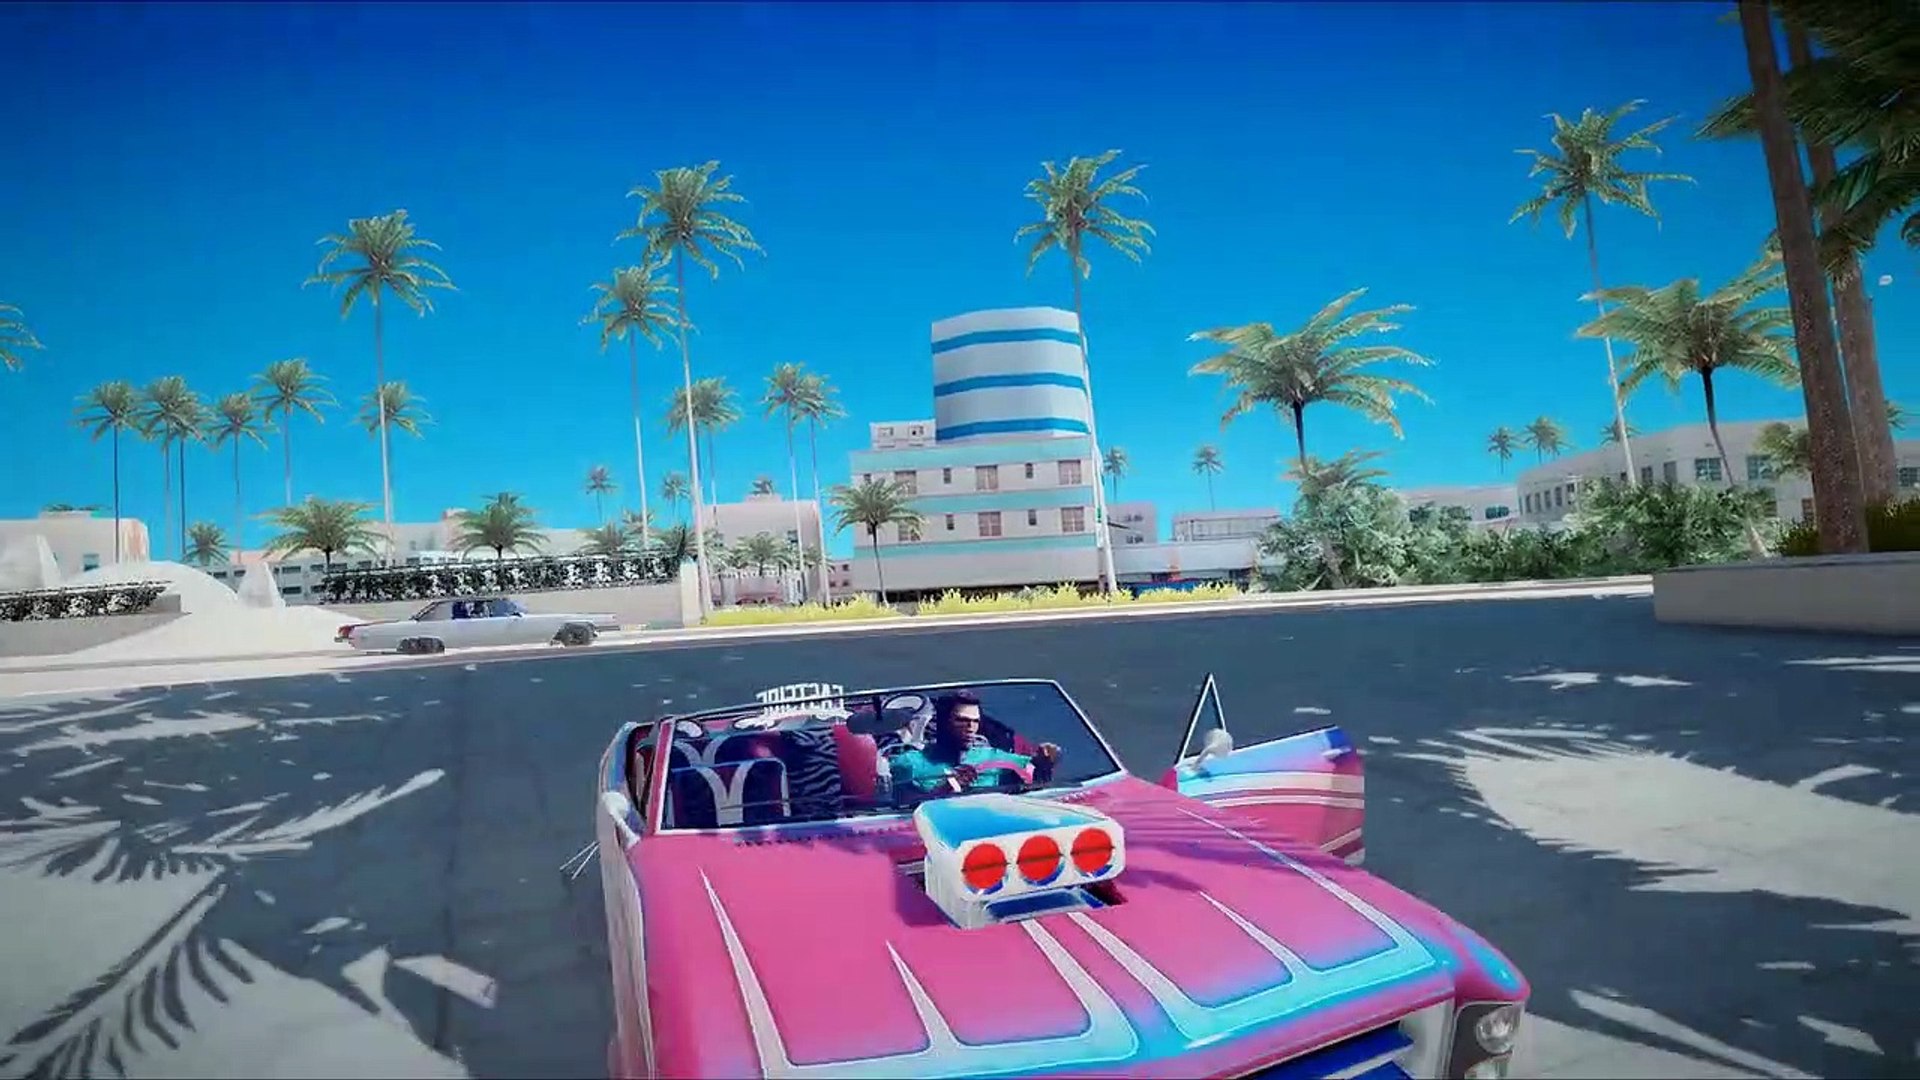 GTA Vice City: Remastered 2022 Gameplay Next-Gen Ray Tracing Graphics on  RTX 3090 / GTA 5 PC MOD 